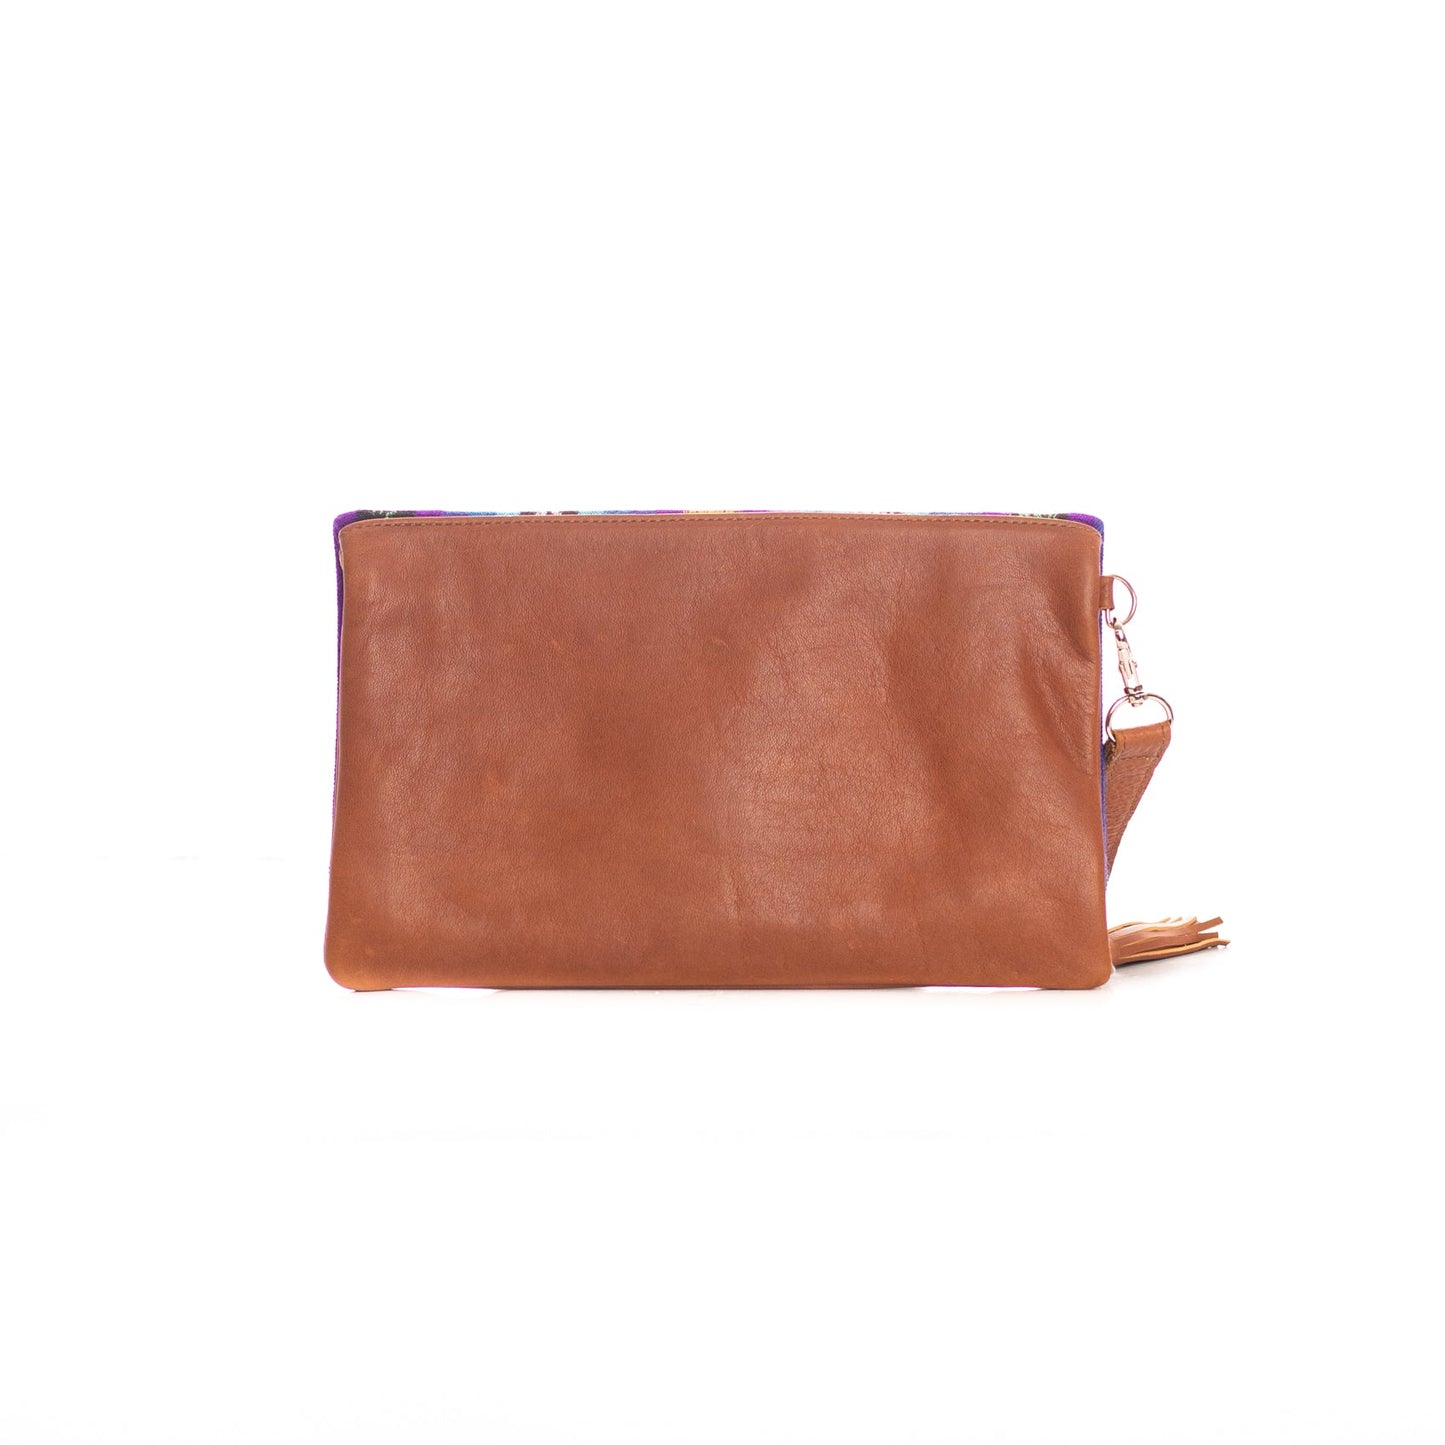 ARCHIVE SALE - FOLD OVER CLUTCH - FEARLESS - CAFE - ITEM NO. 26720